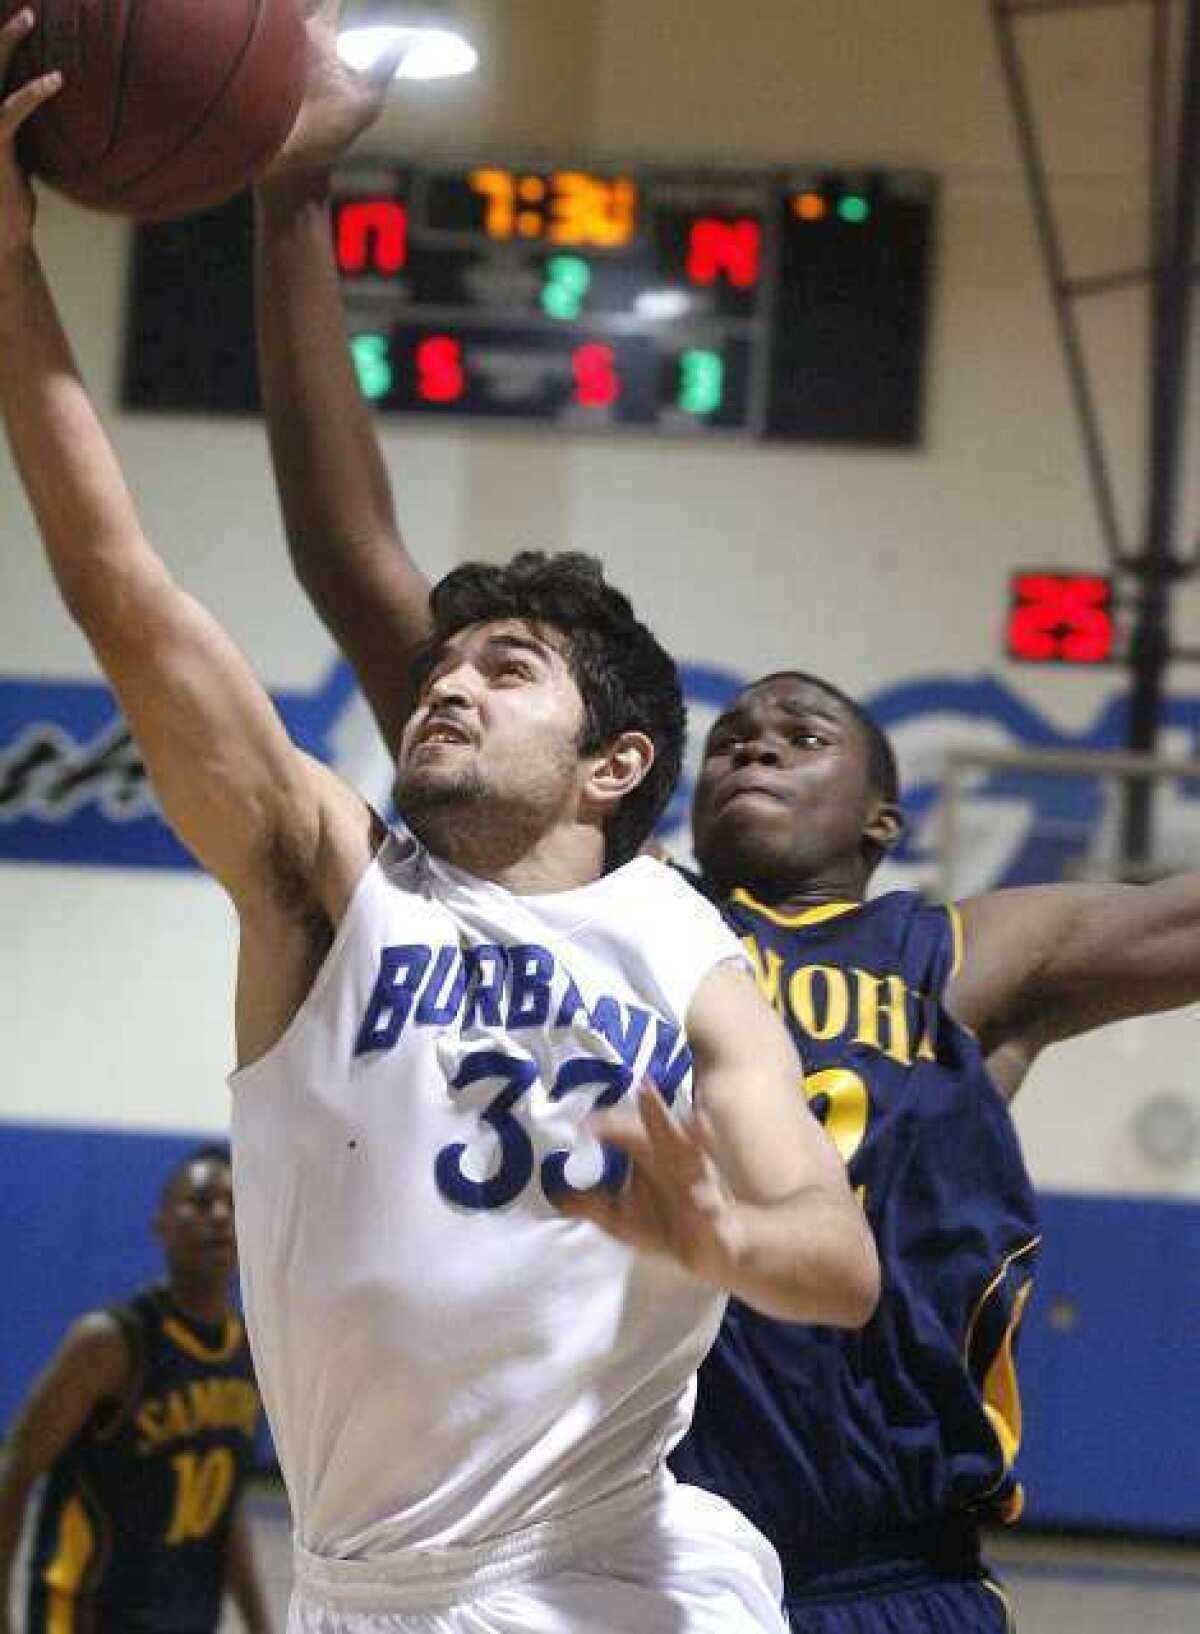 Burbank's Sarkis Karian scored a team-high 16 points to go along with six rebounds.